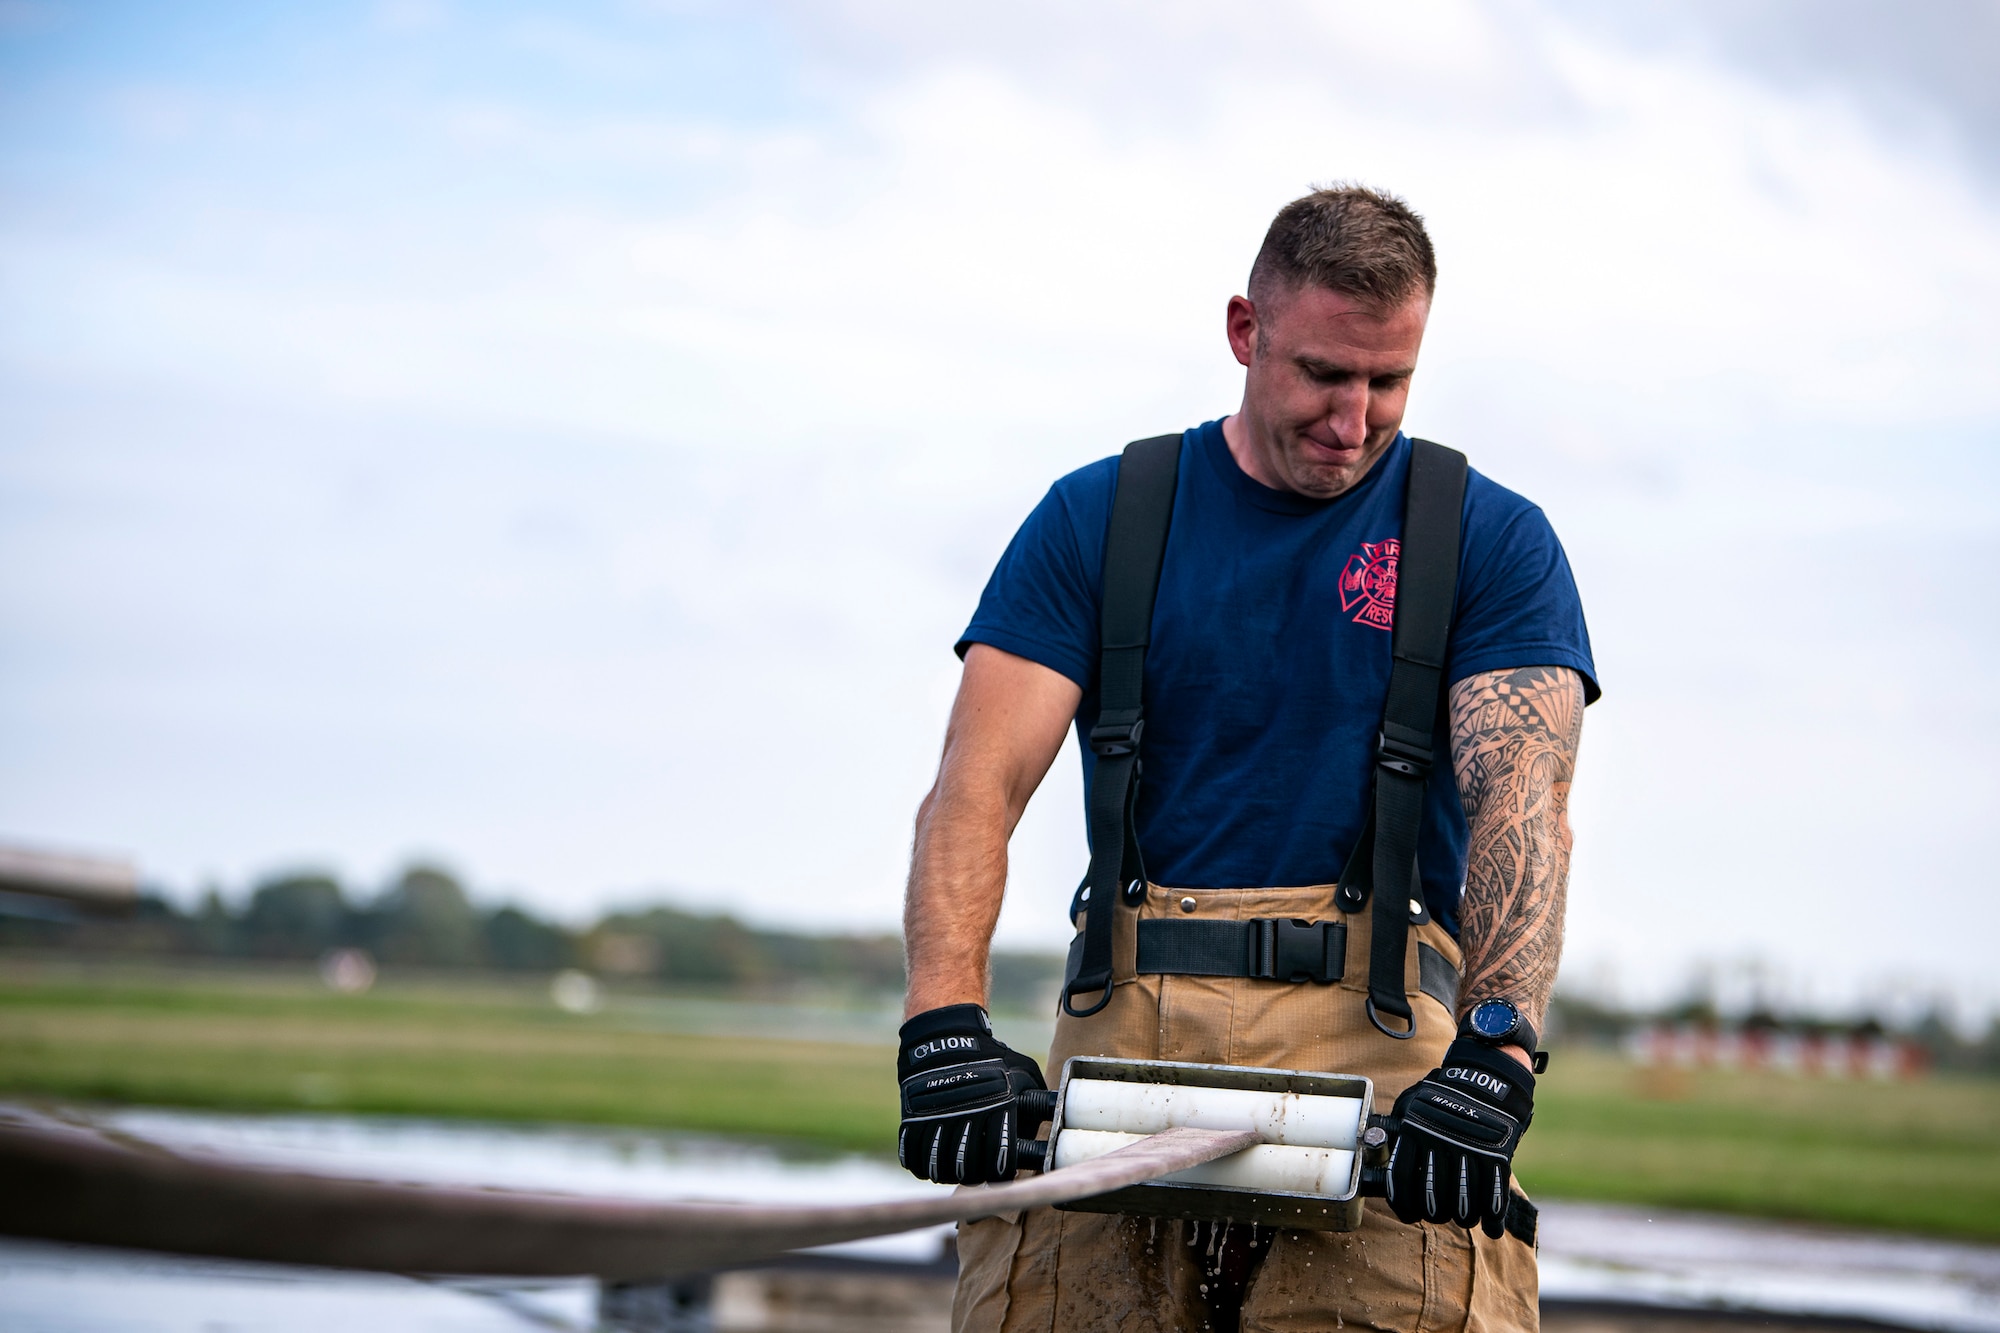 A firefighter from the 422d Fire Emergency Services, empties a fire hose following a live-fire training exercise at RAF Fairford, England, Oct. 3, 2022. Firefighters from the 422d FES, are required to complete live-fire training bi-annualy to test thief overall readiness and ability to properly extinguish an aircraft fire. (U.S. Air Force photo by Staff Sgt. Eugene Oliver)